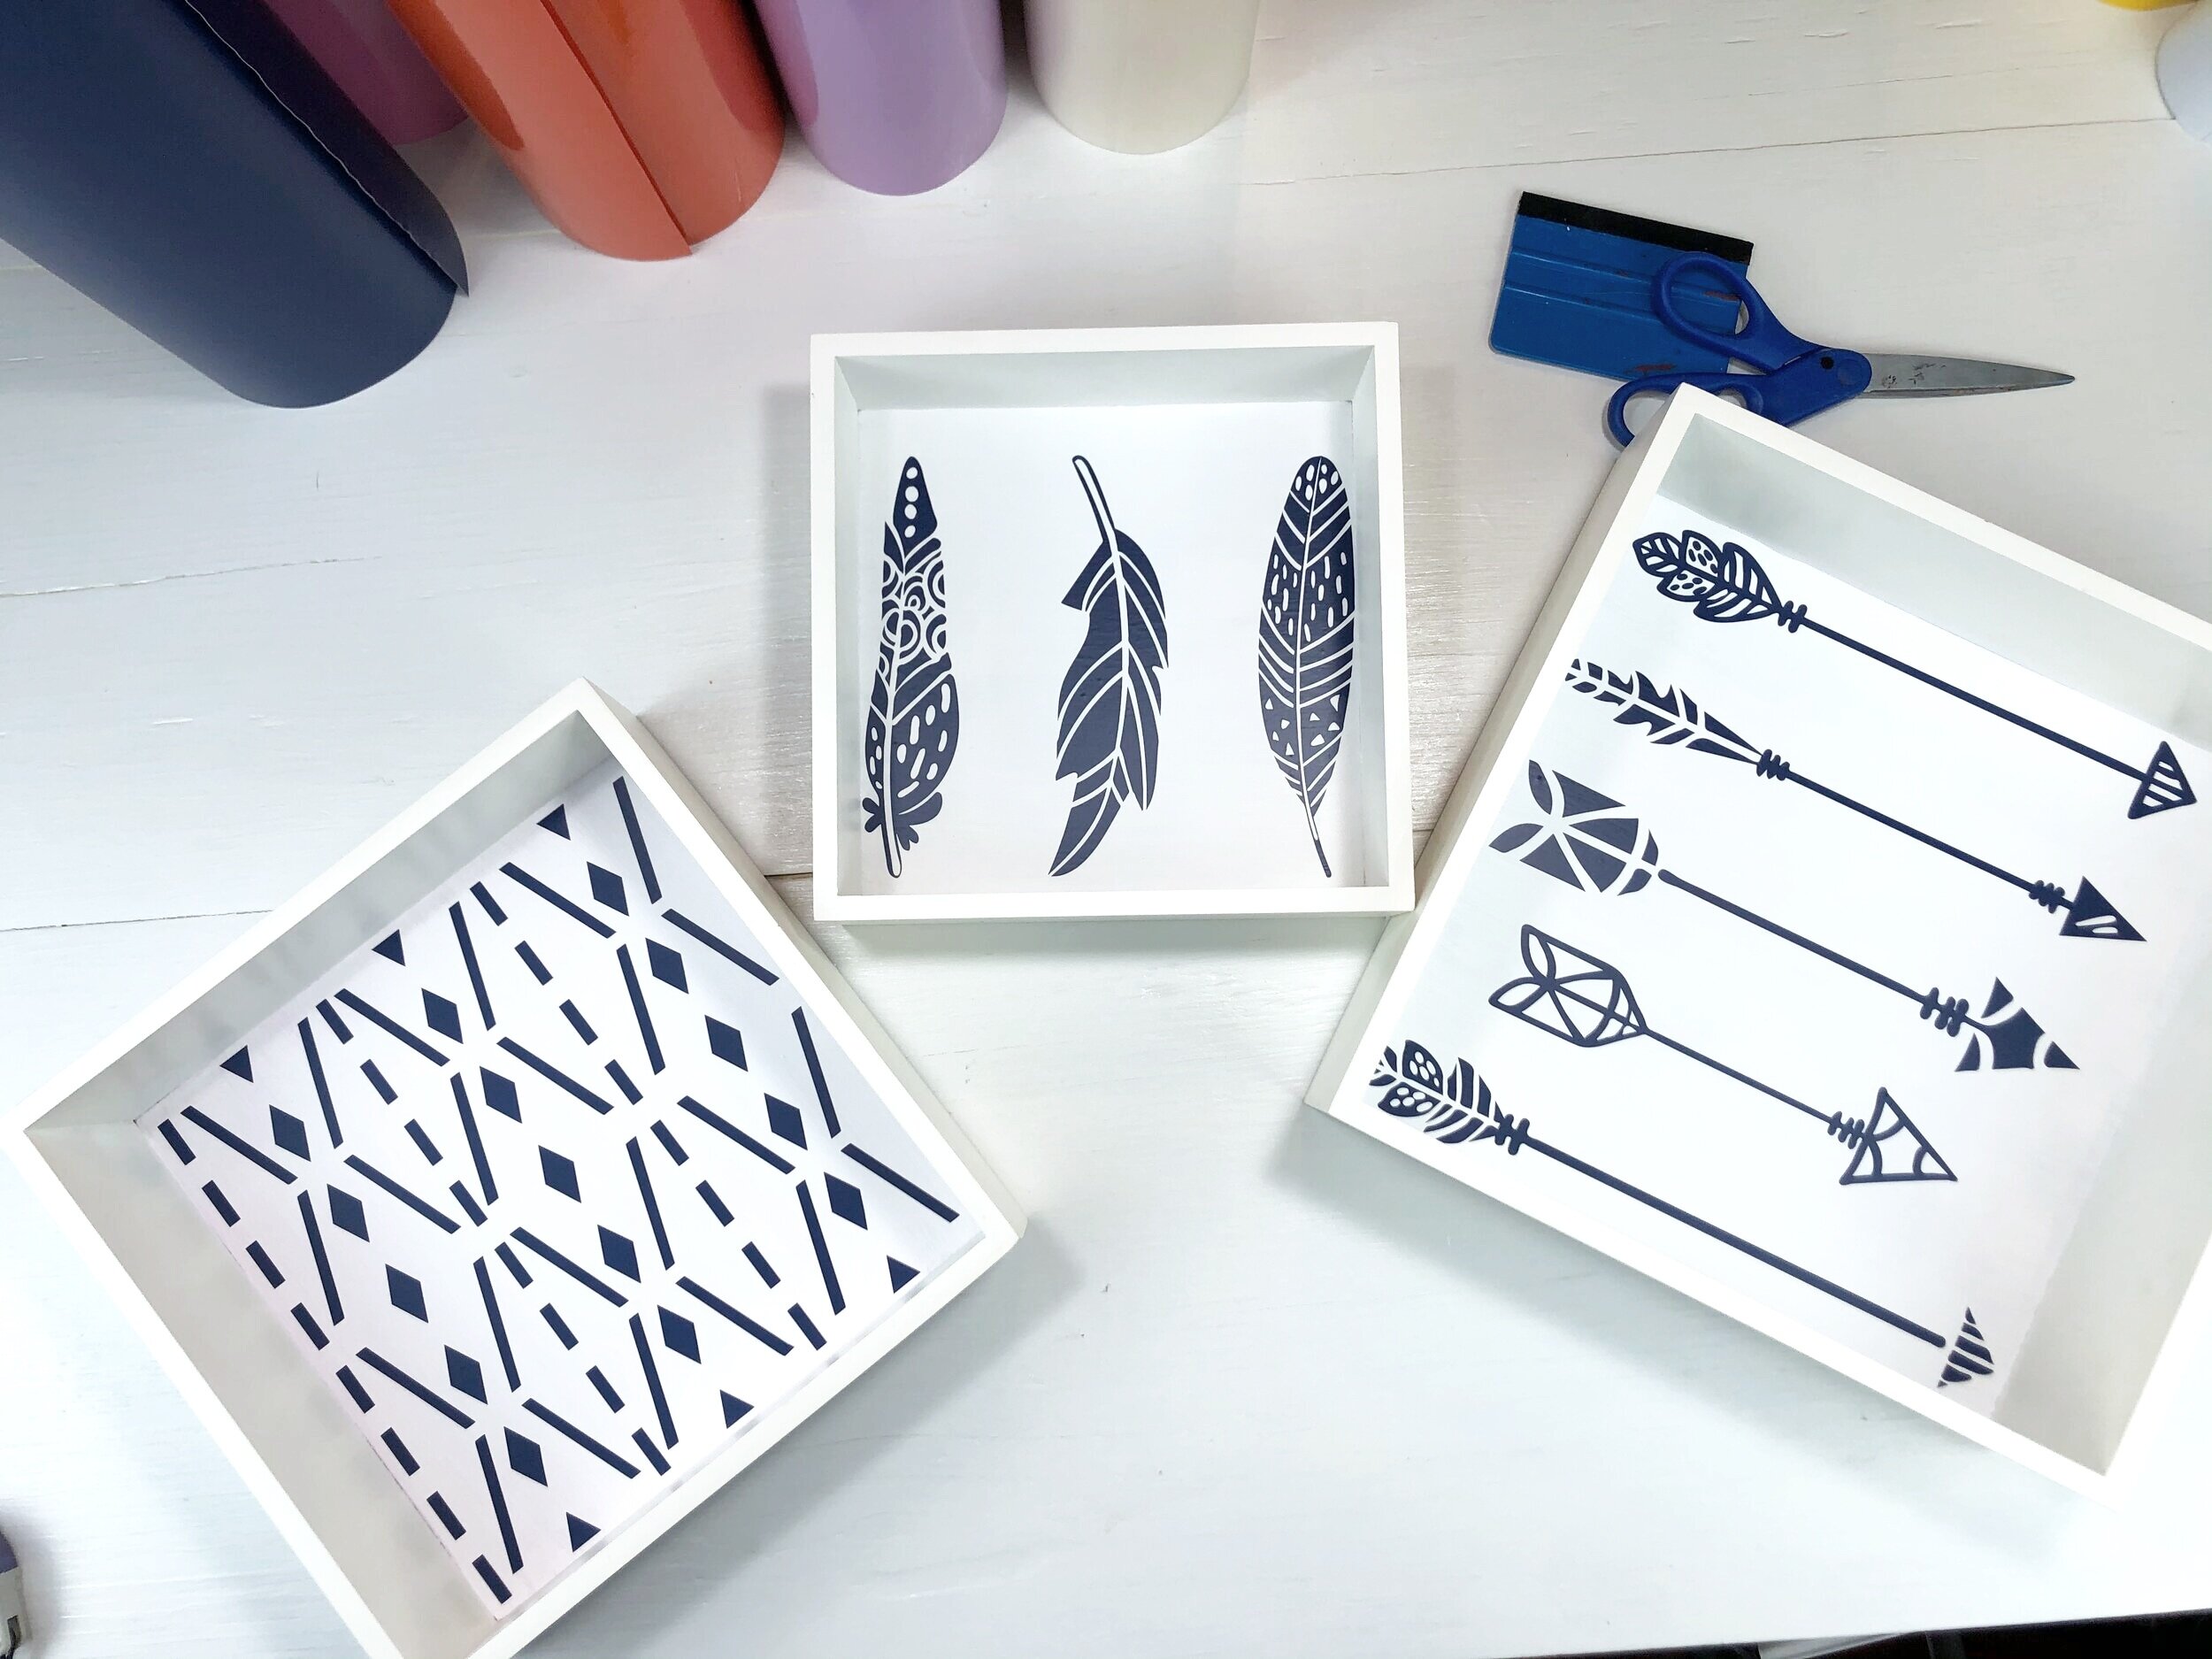 DIY boho shelf decals using your Cricut. How to makeover outdated floating cub shelves for a boho inspired bedroom. Feather, arrow, and geometric shapes for bohemian style home decor.